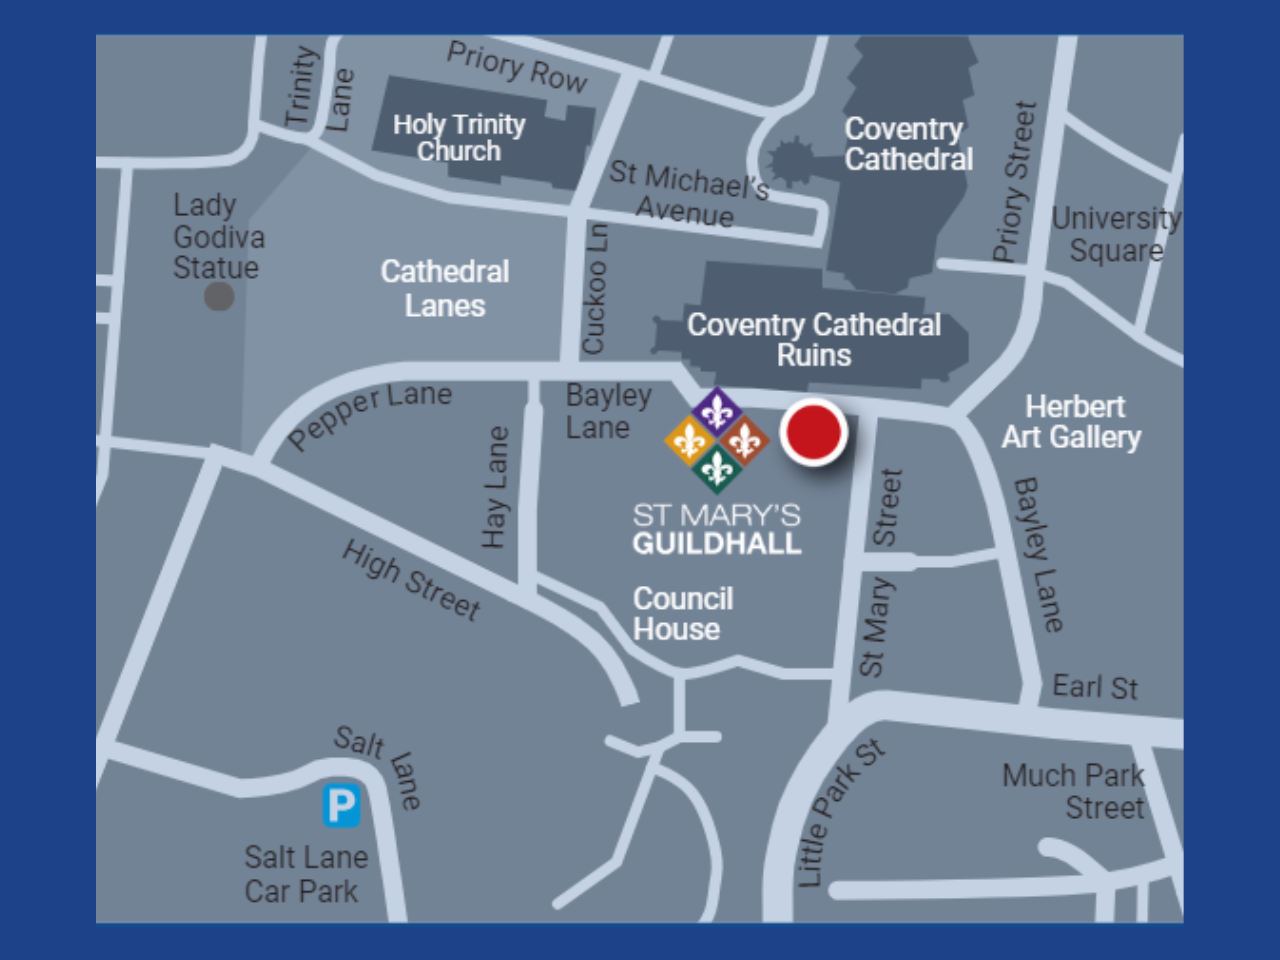 Image of a map of Coventry city centre.  